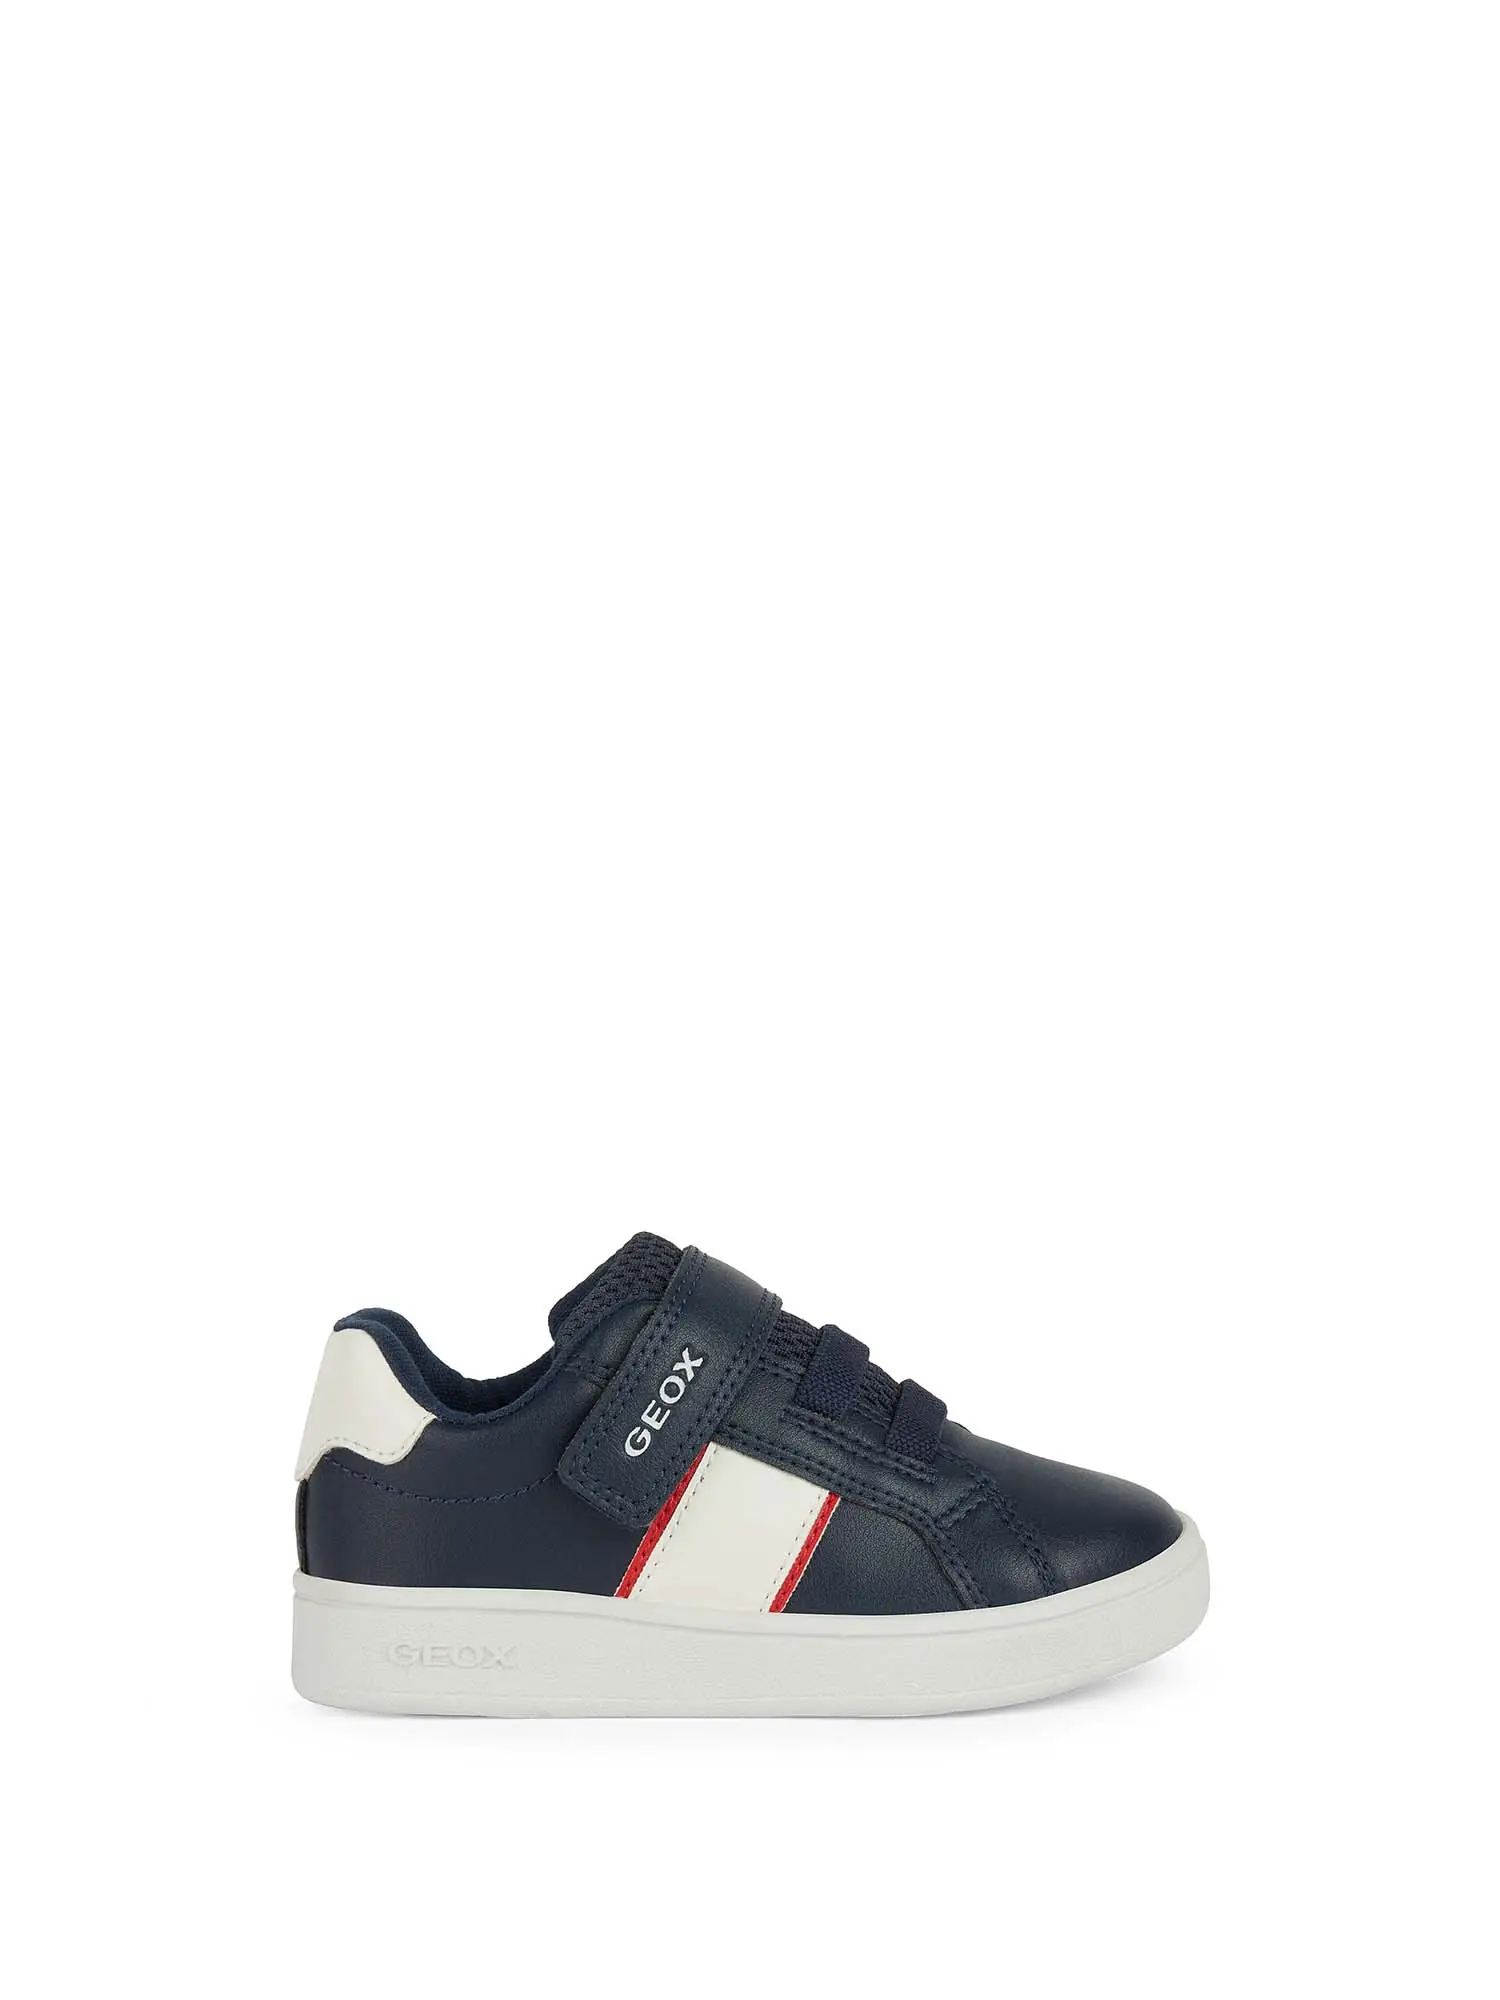 SNEAKERS BAMBINO - GEOX - B455LA 000BC - NAVY/ROSSO, 27